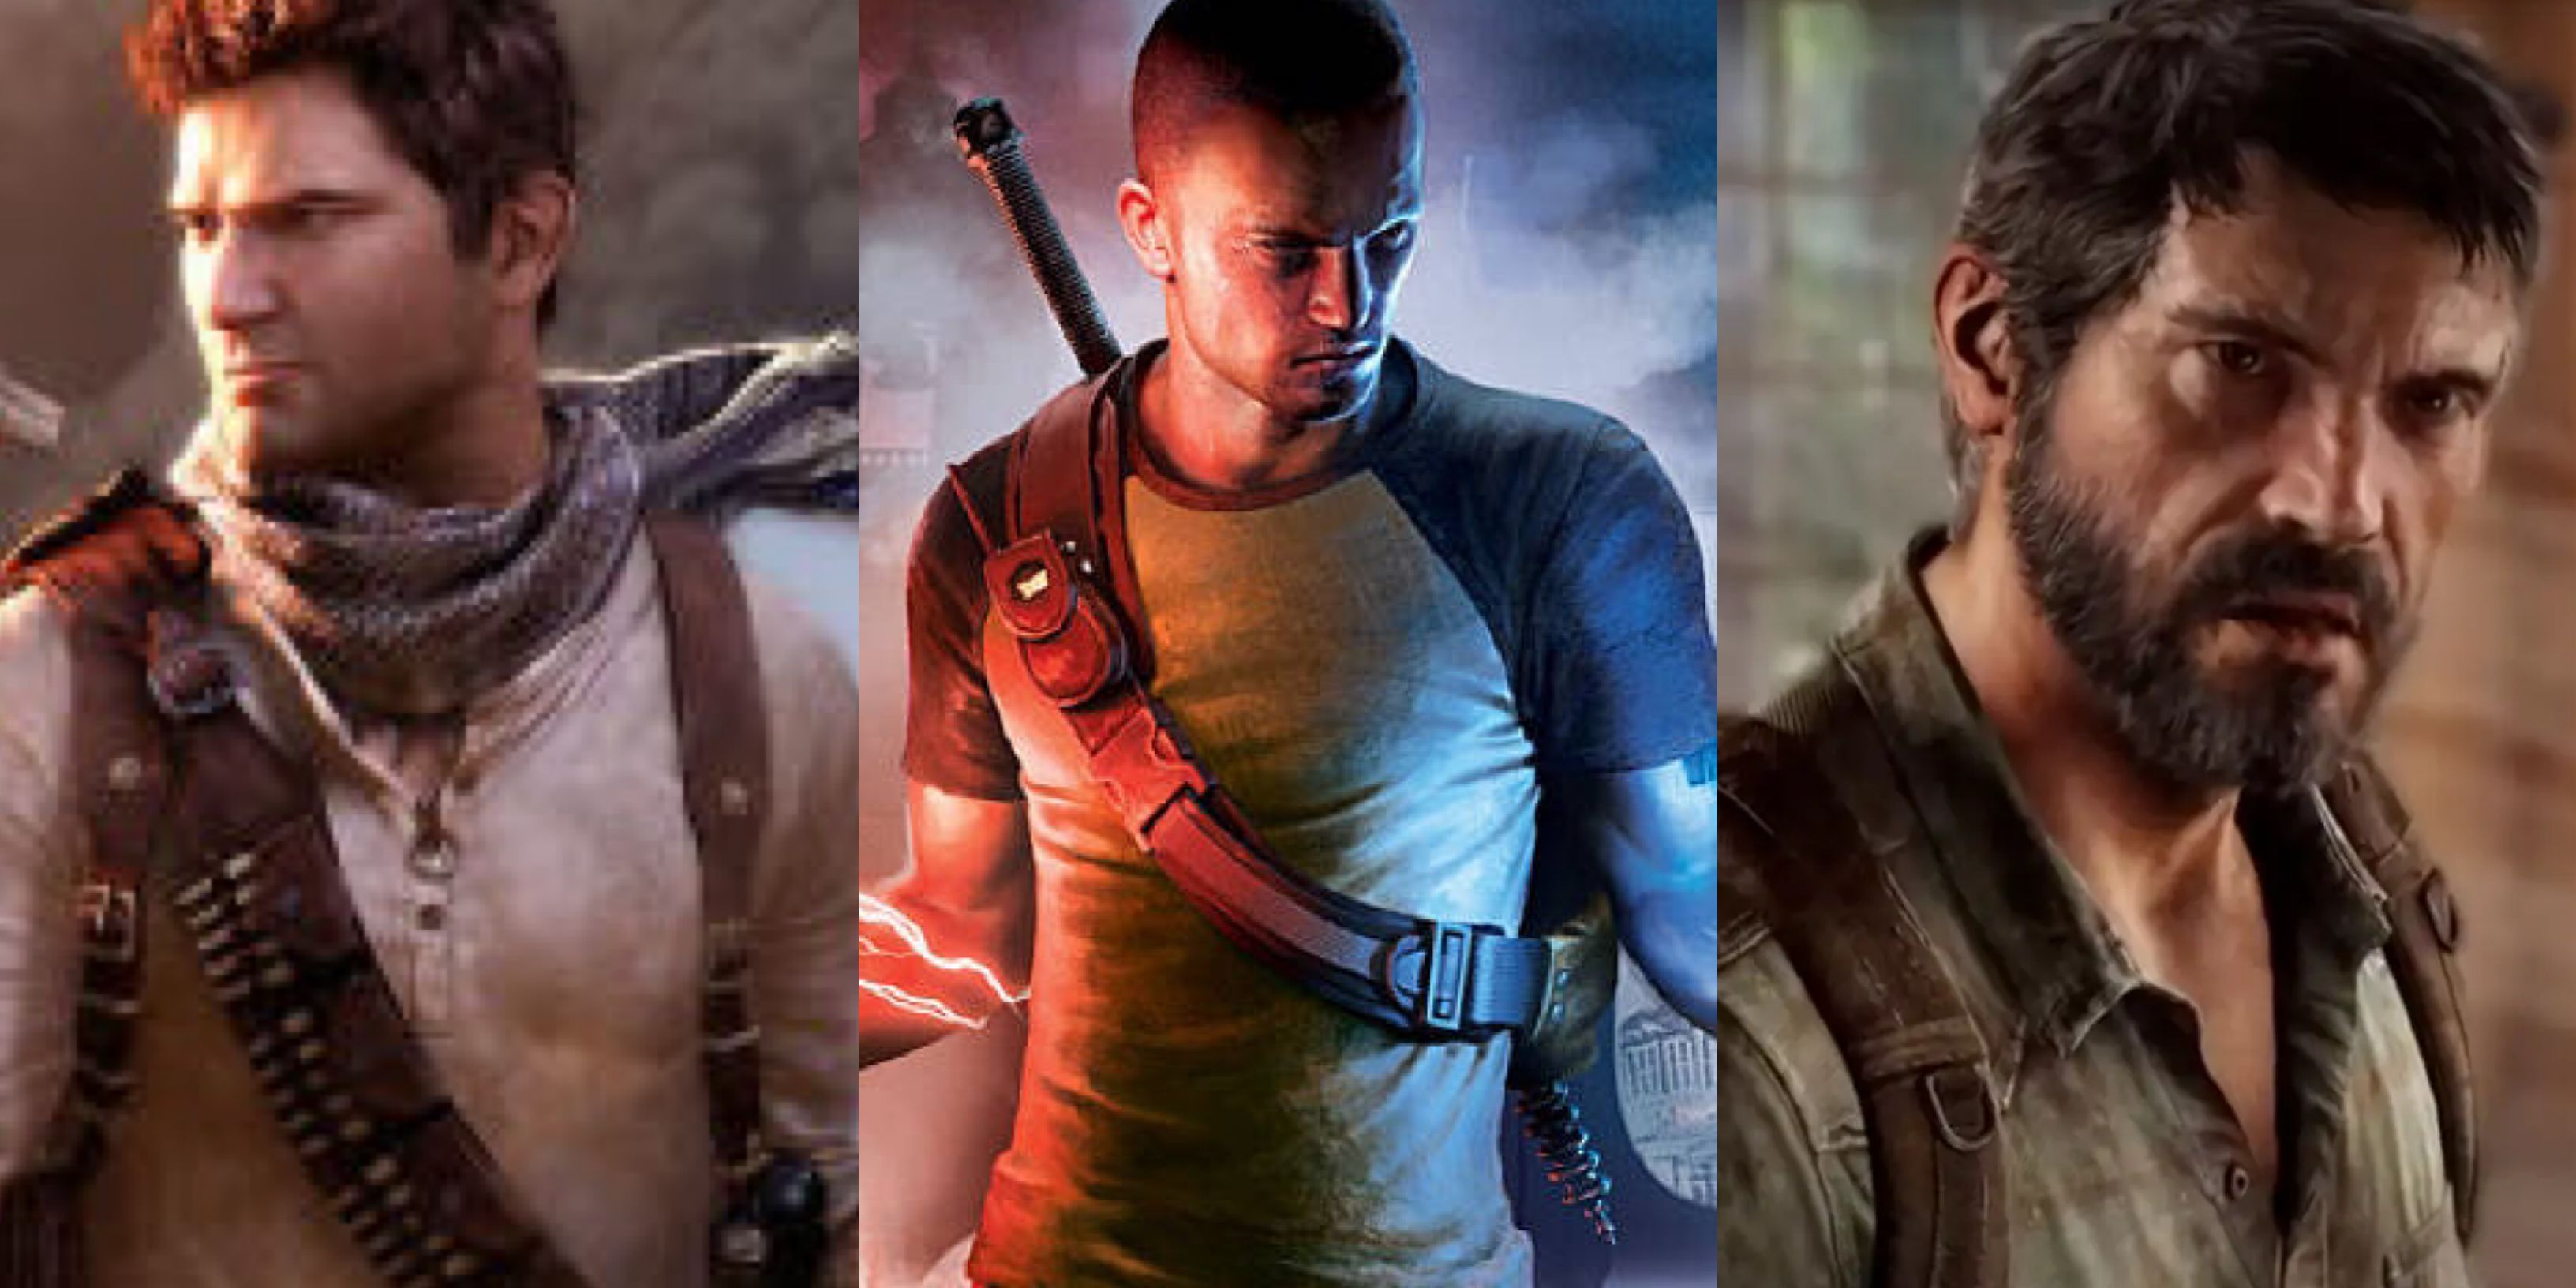 Great Characters That Debuted On The PS3: Nathan Drake from the Uncharted series (left), Cole MacGrath from the Infamous series (middle), and Joel Miller from The Last of Us (right)